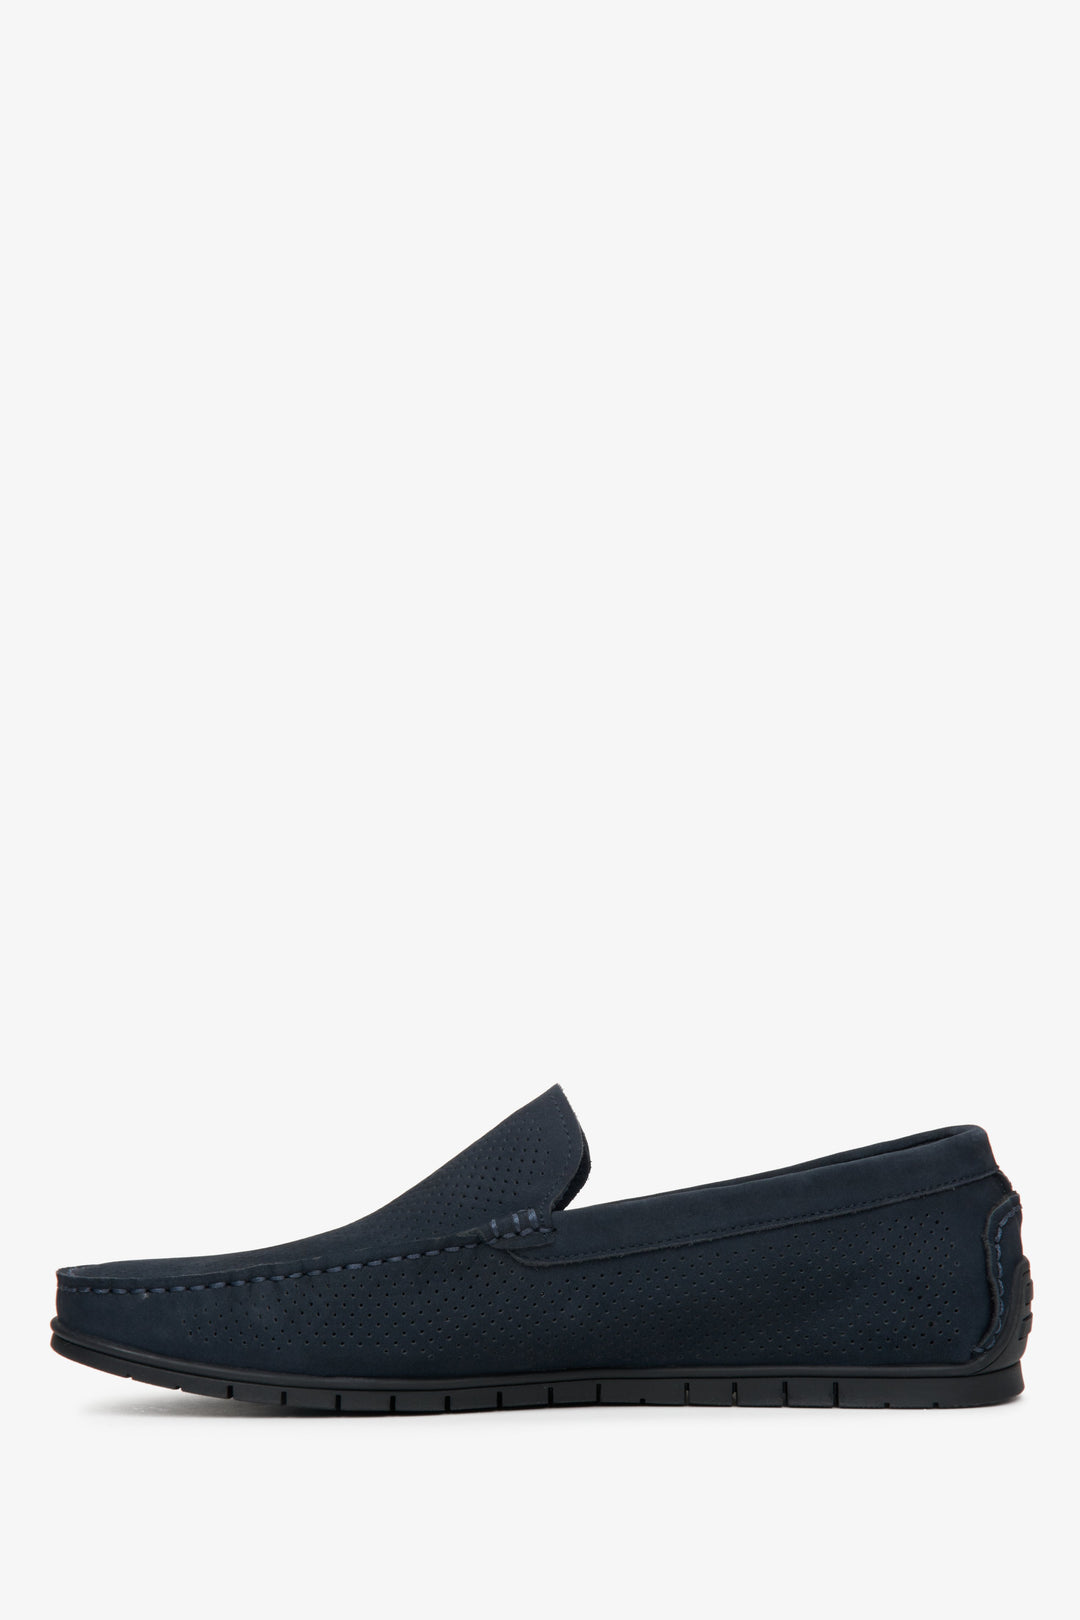 Estro brand nubuck men's loafers with perforation for fall - shoe profile presentation.